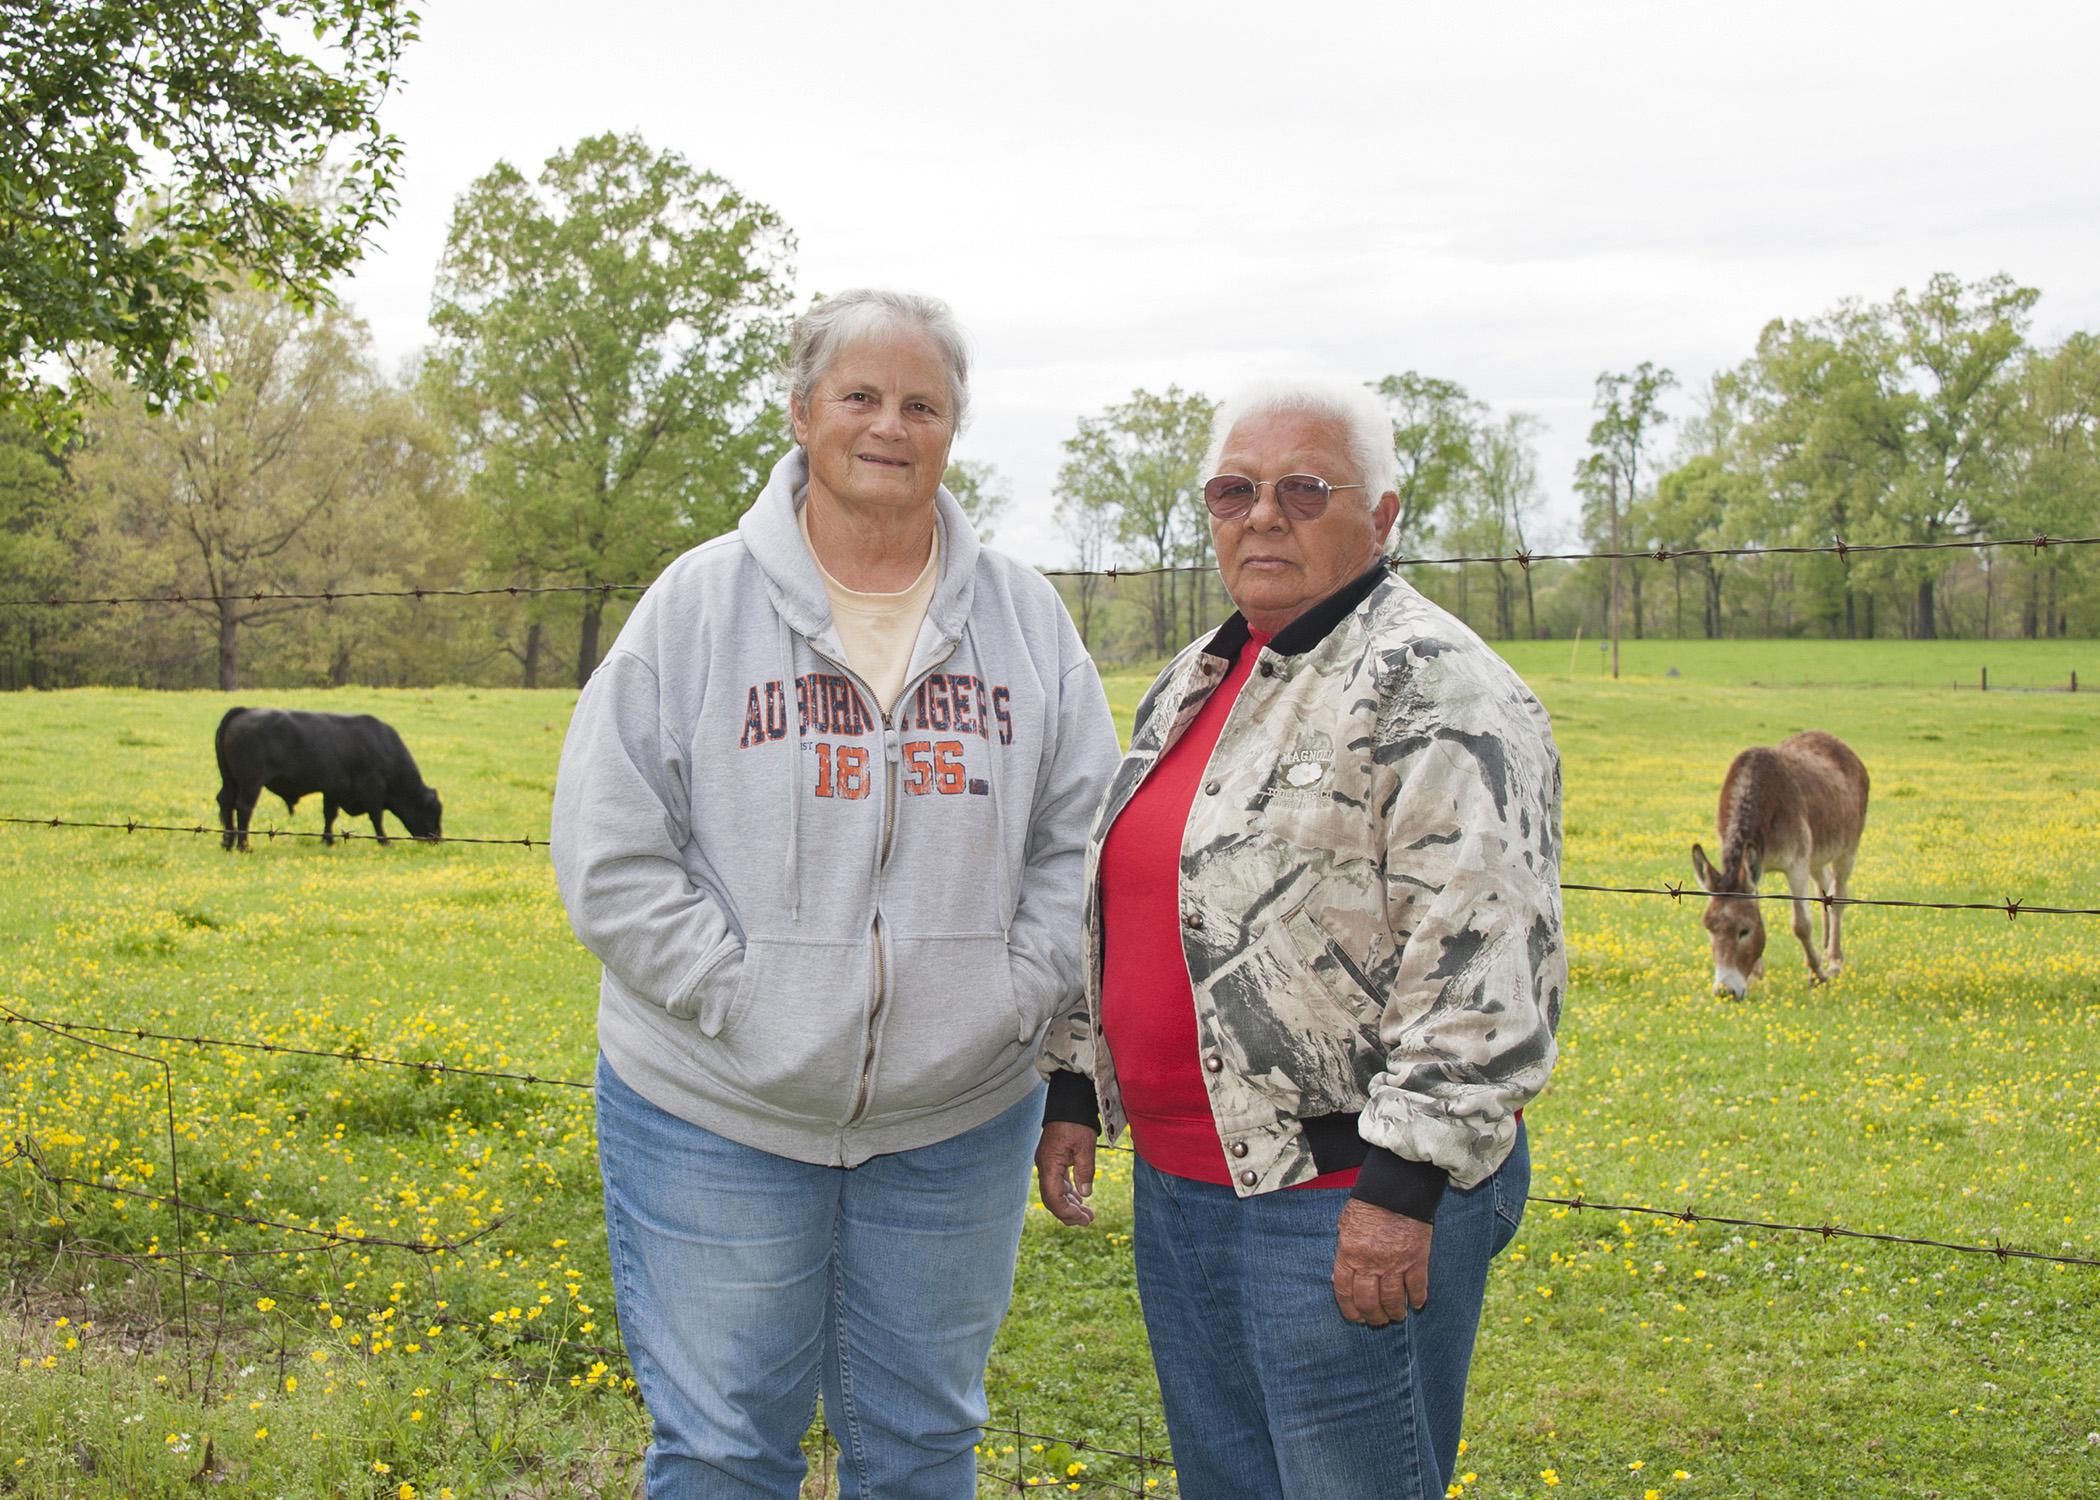 Cattle producers Genette Hunt and Sarah Harvill of Franklin County use sustainable production methods, such as rotational grazing, to make their business more profitable while reducing their workload. The two began a joint farming operation in 1987 after retiring from the medical field. (Photo by MSU Ag Communications/Kat Lawrence)